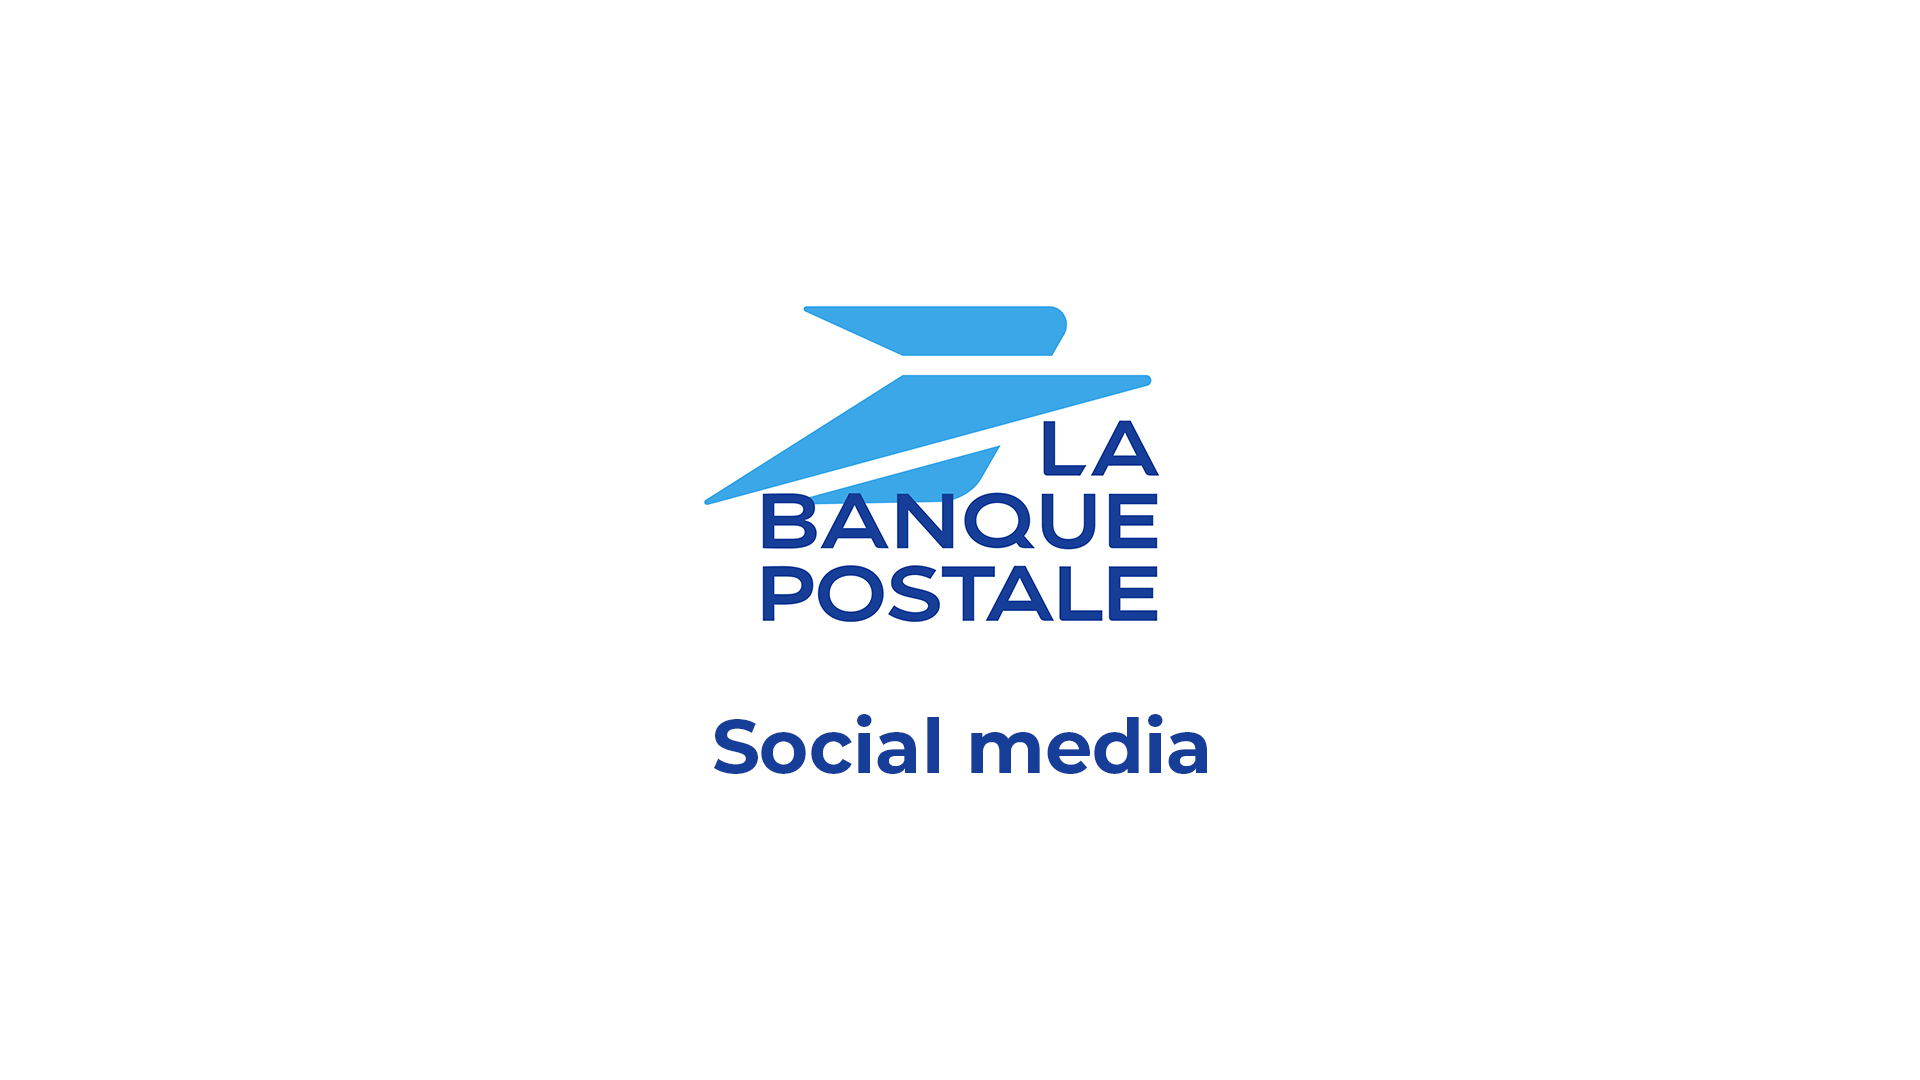 You are currently viewing La Banque Postale – Social media